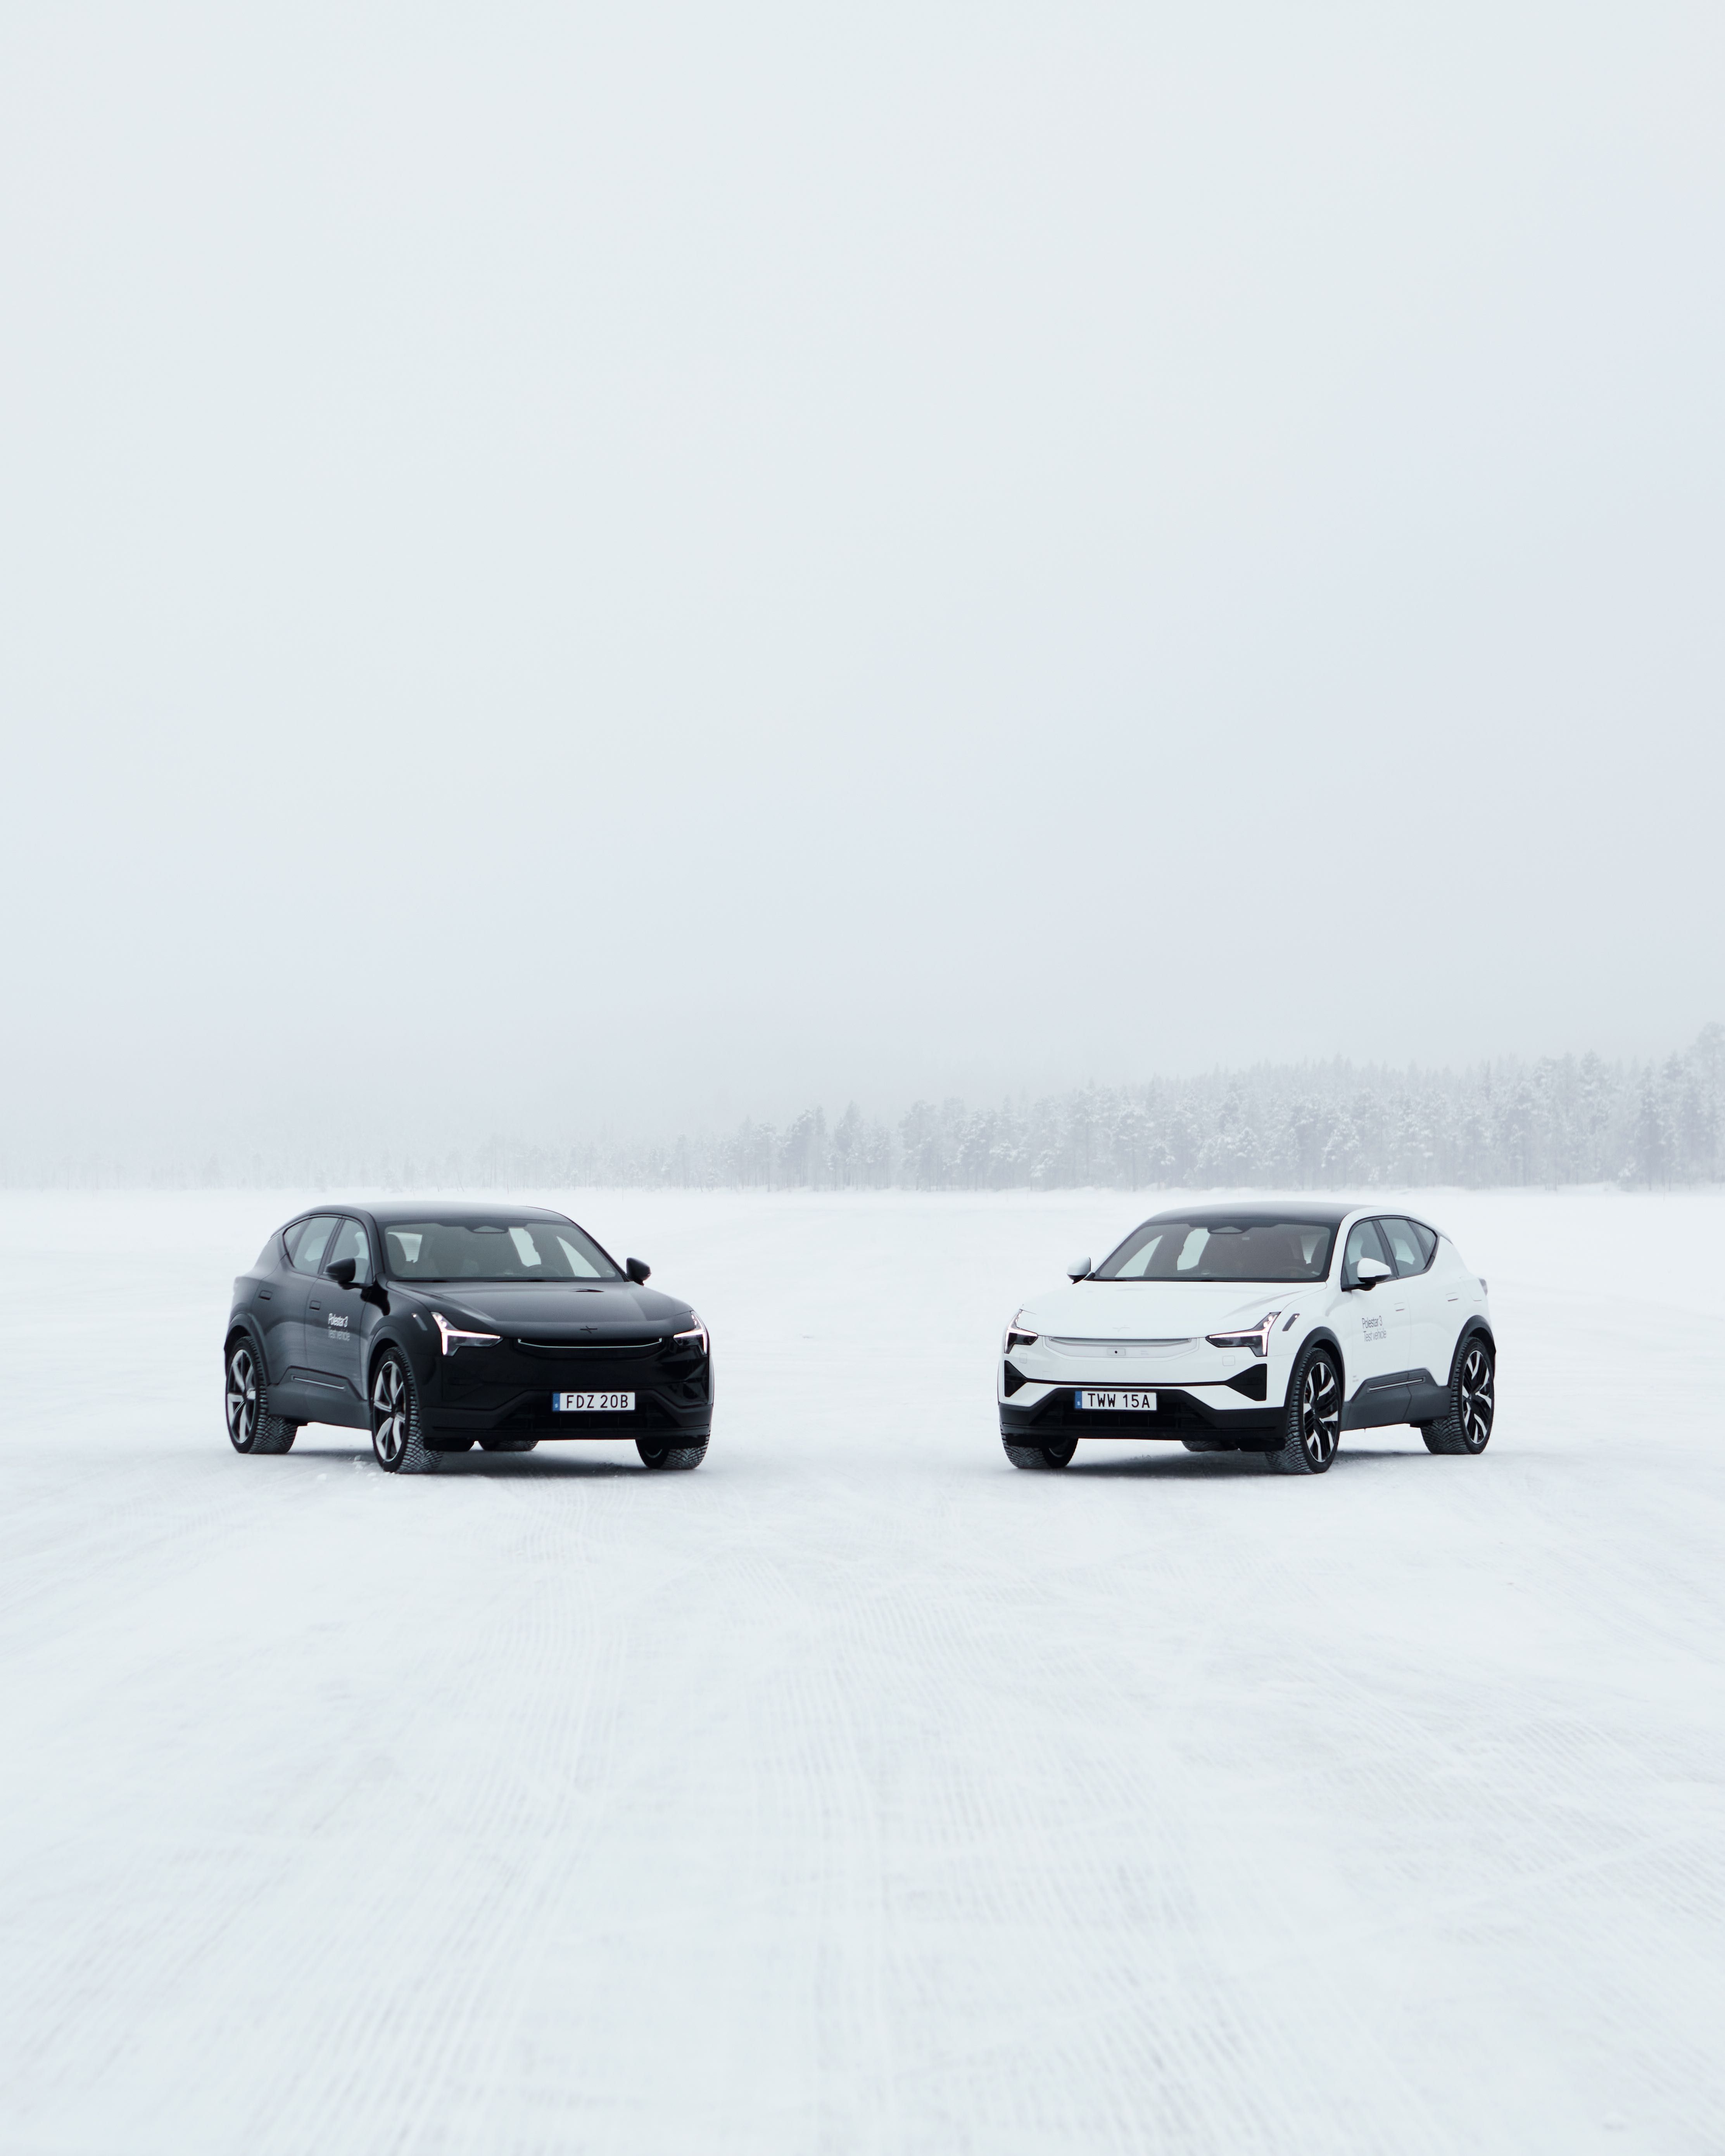 No compromises: Polestar at the Big Game